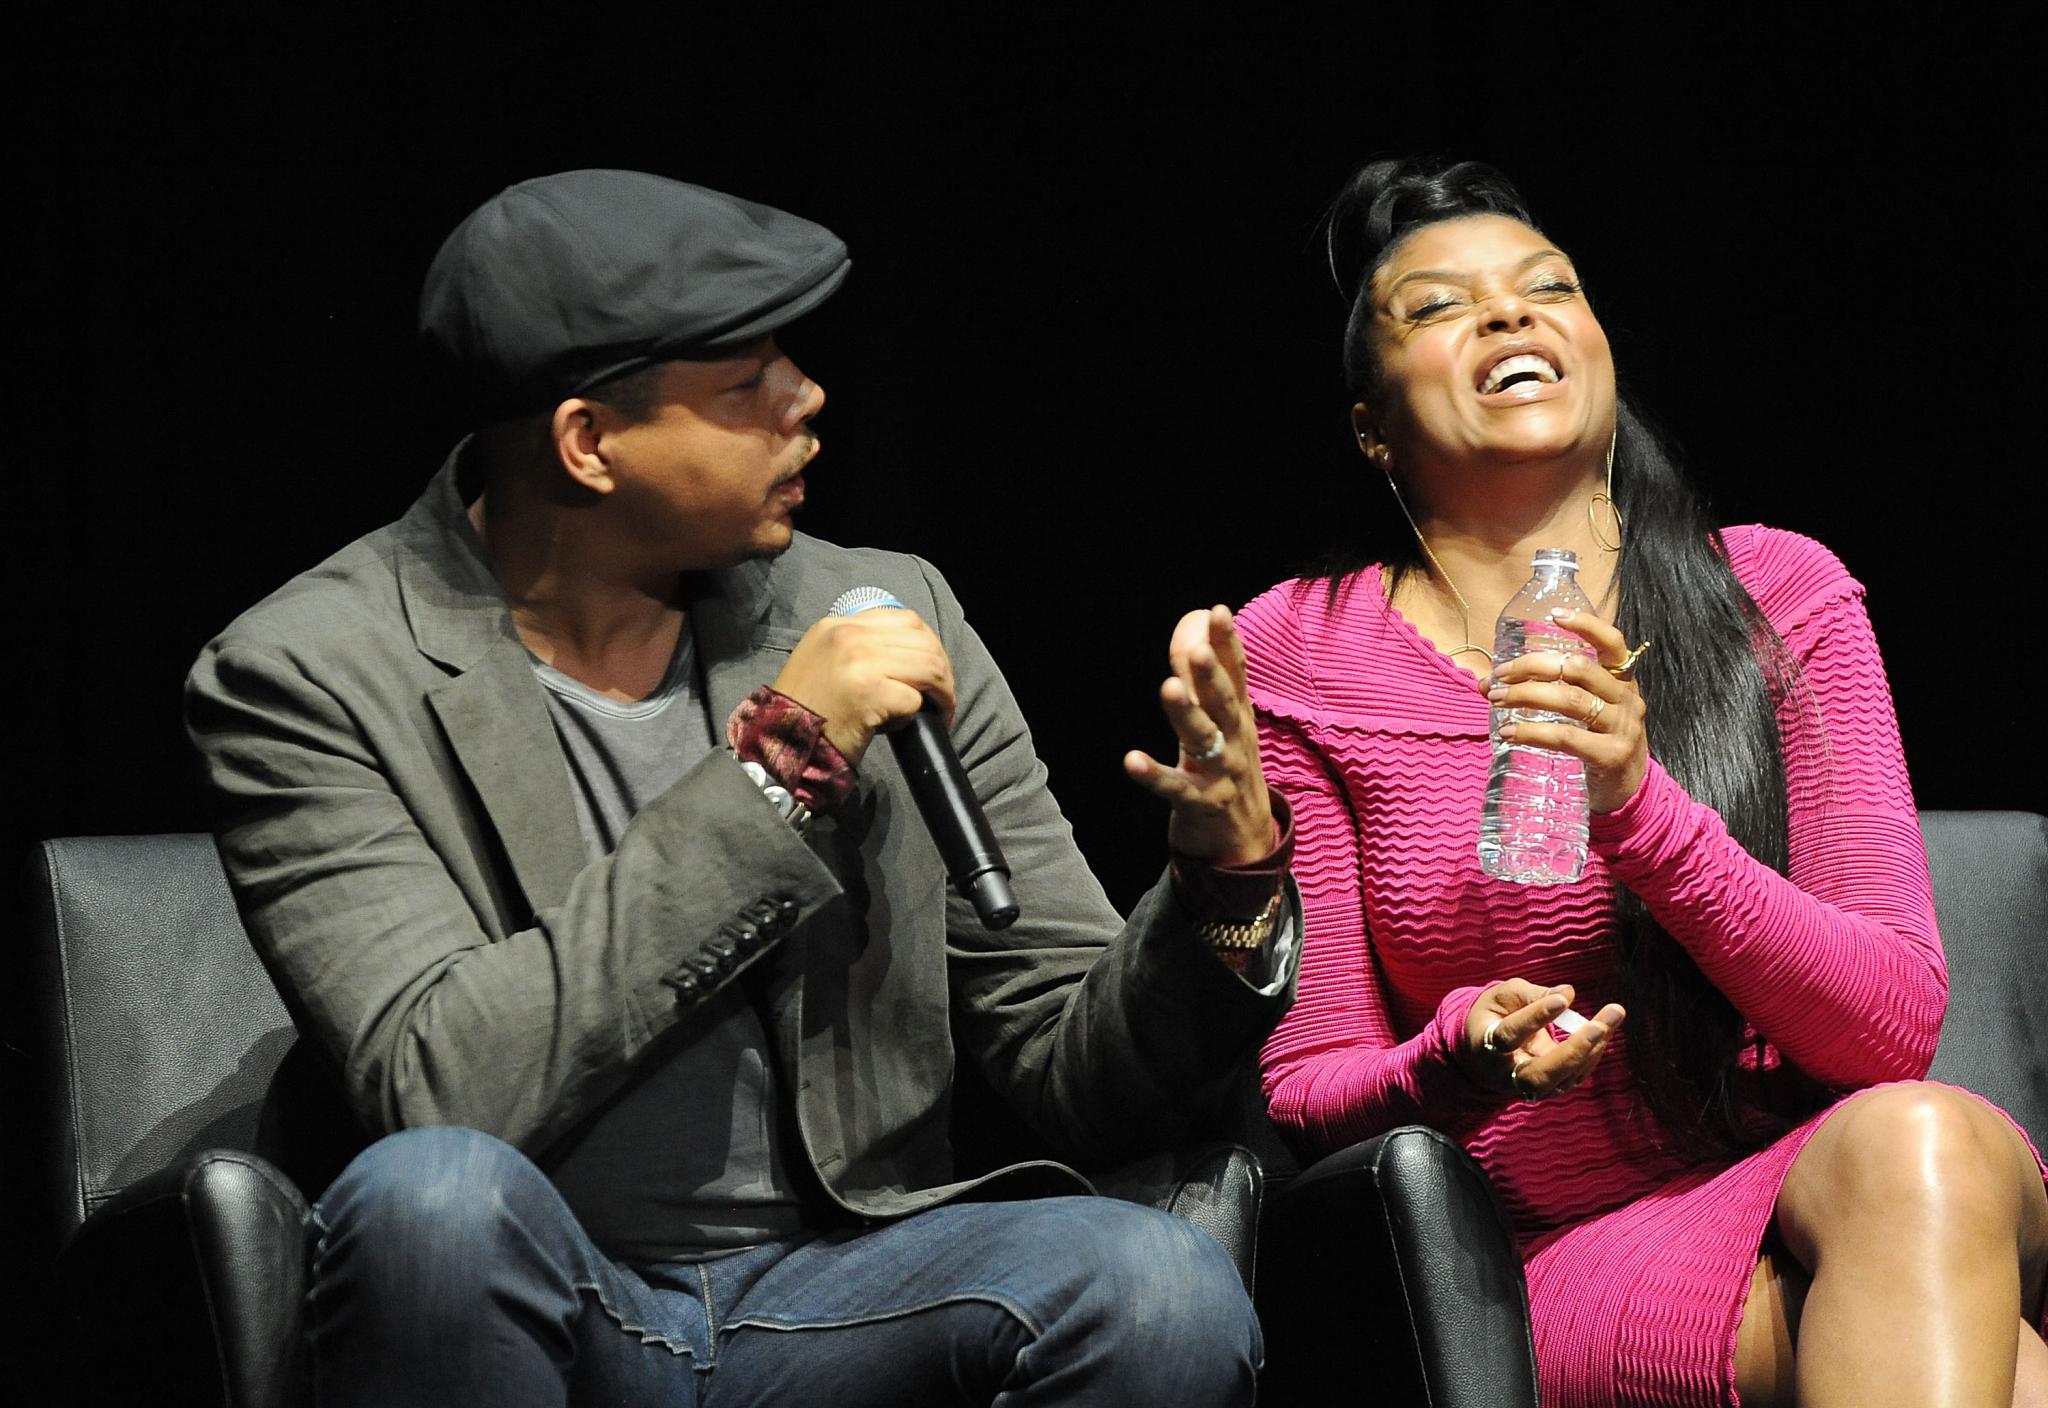 21 Things We Learned from the 'Empire' Emmy Panel
